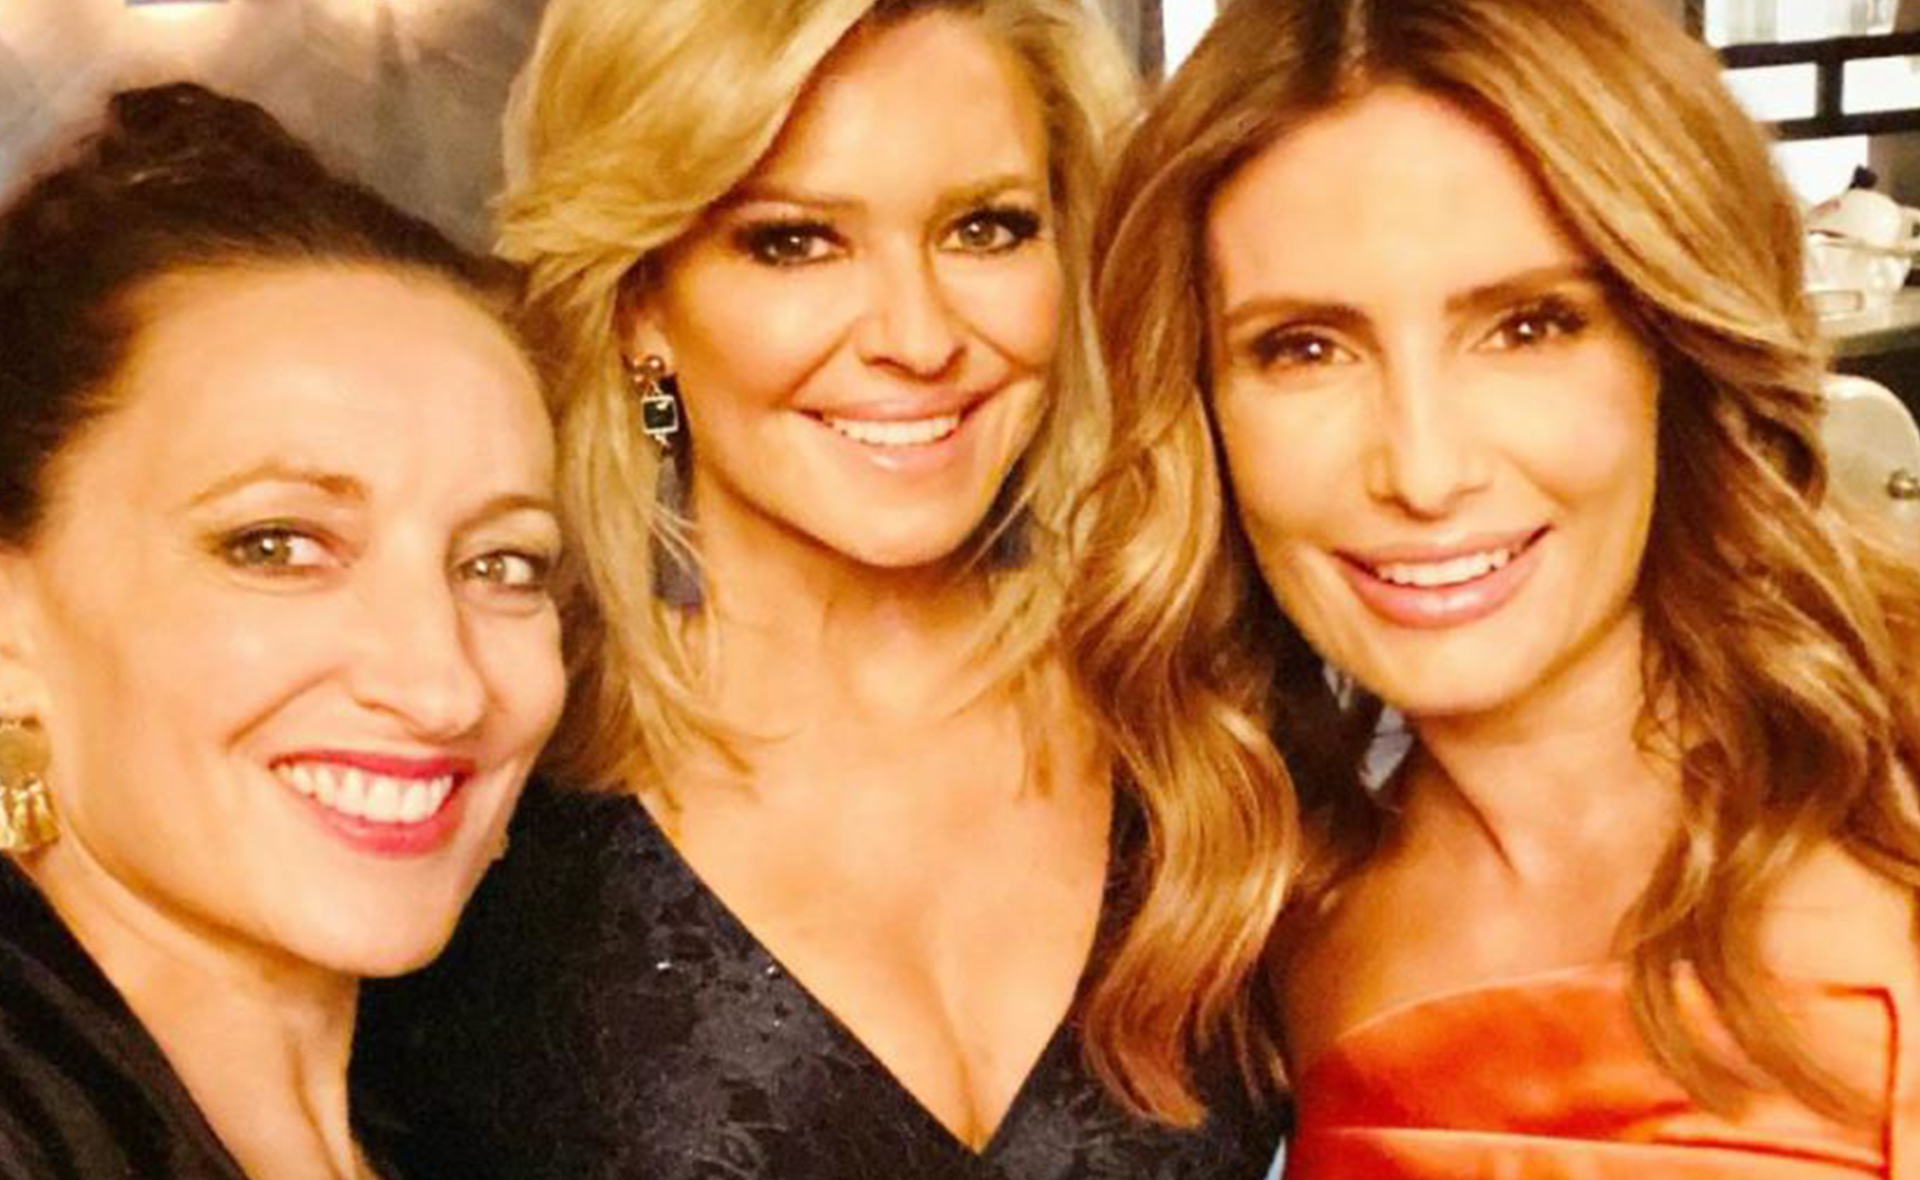 “They were long days but we had a ball”: Ada Nicodemou shares a sweet tribute to her Home & Away co-stars after a gruelling week of filming